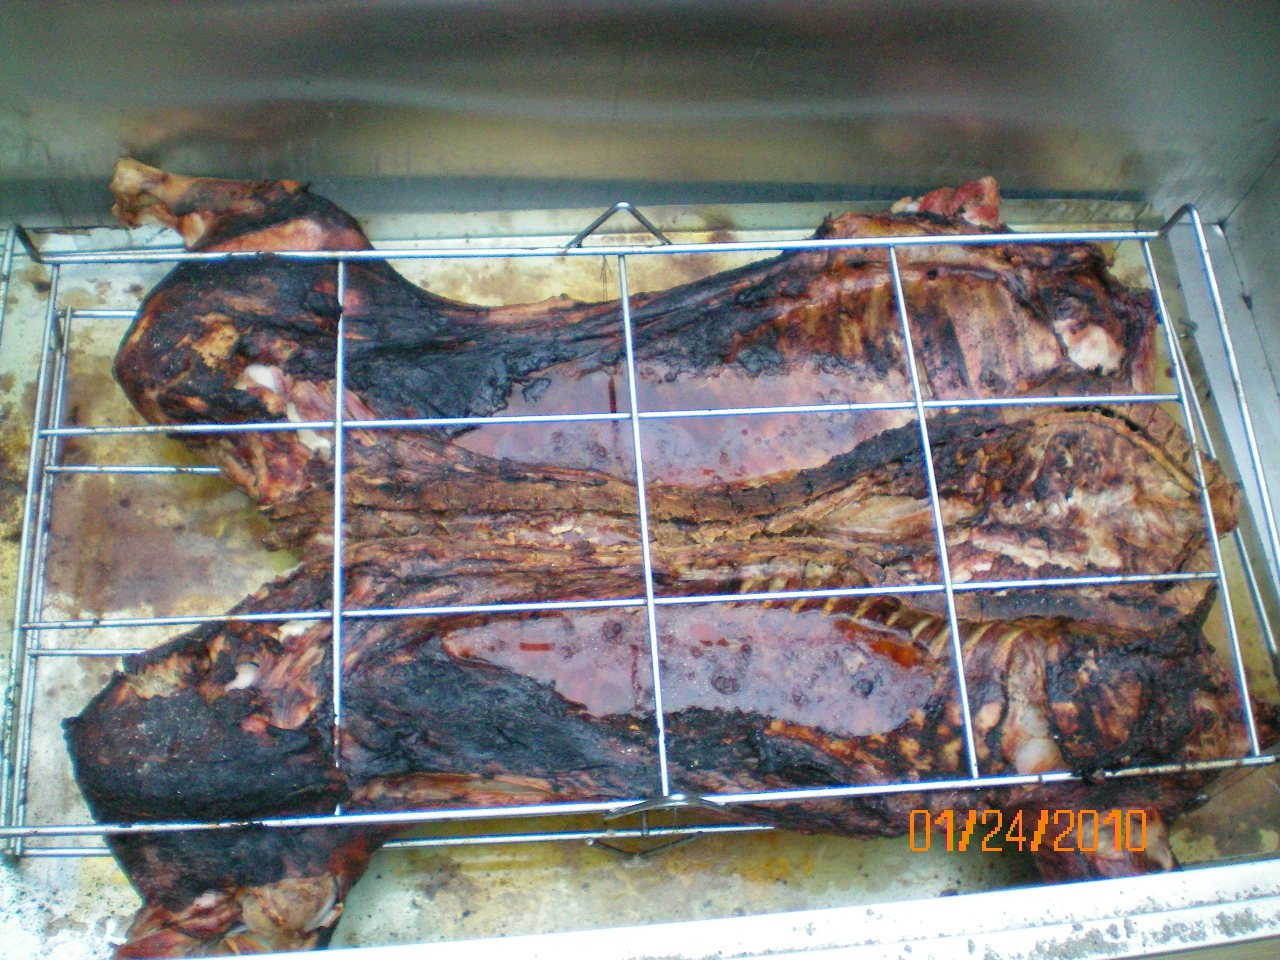 Pig Roast With The La Caja China – Tkd Recipes  Men In The Kitchen And Caja China Worksheet